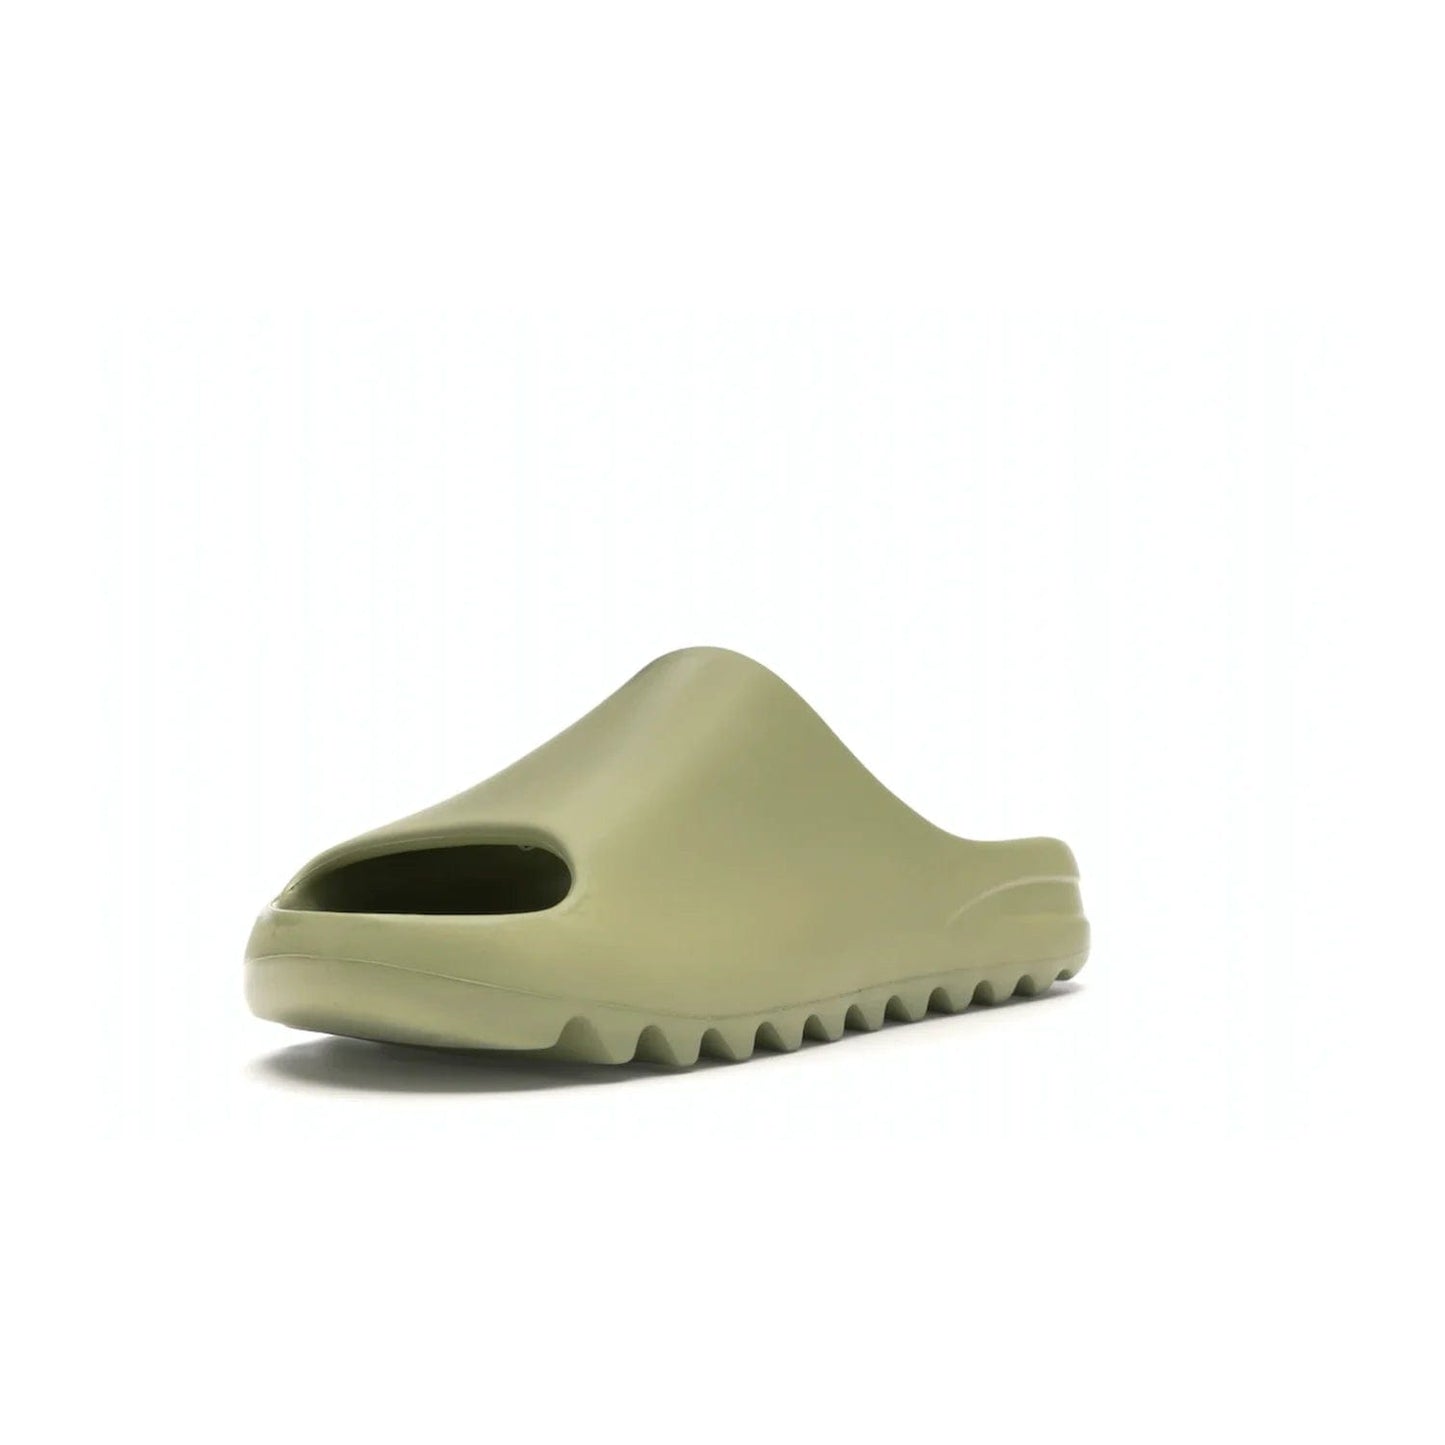 adidas Yeezy Slide Resin (2019/2021) - Image 14 - Only at www.BallersClubKickz.com - Step into fashion and function with the adidas Yeezy Slide Resin. Featuring a lightweight Resin EVA foam construction and an outsole with accentuated grooves for traction and support. The latest release is available in a Resin/Resin/Resin colorway, combining modern aesthetics and classic style. Step into style with the adidas Yeezy Slide Resin and be the trend-setter this season.